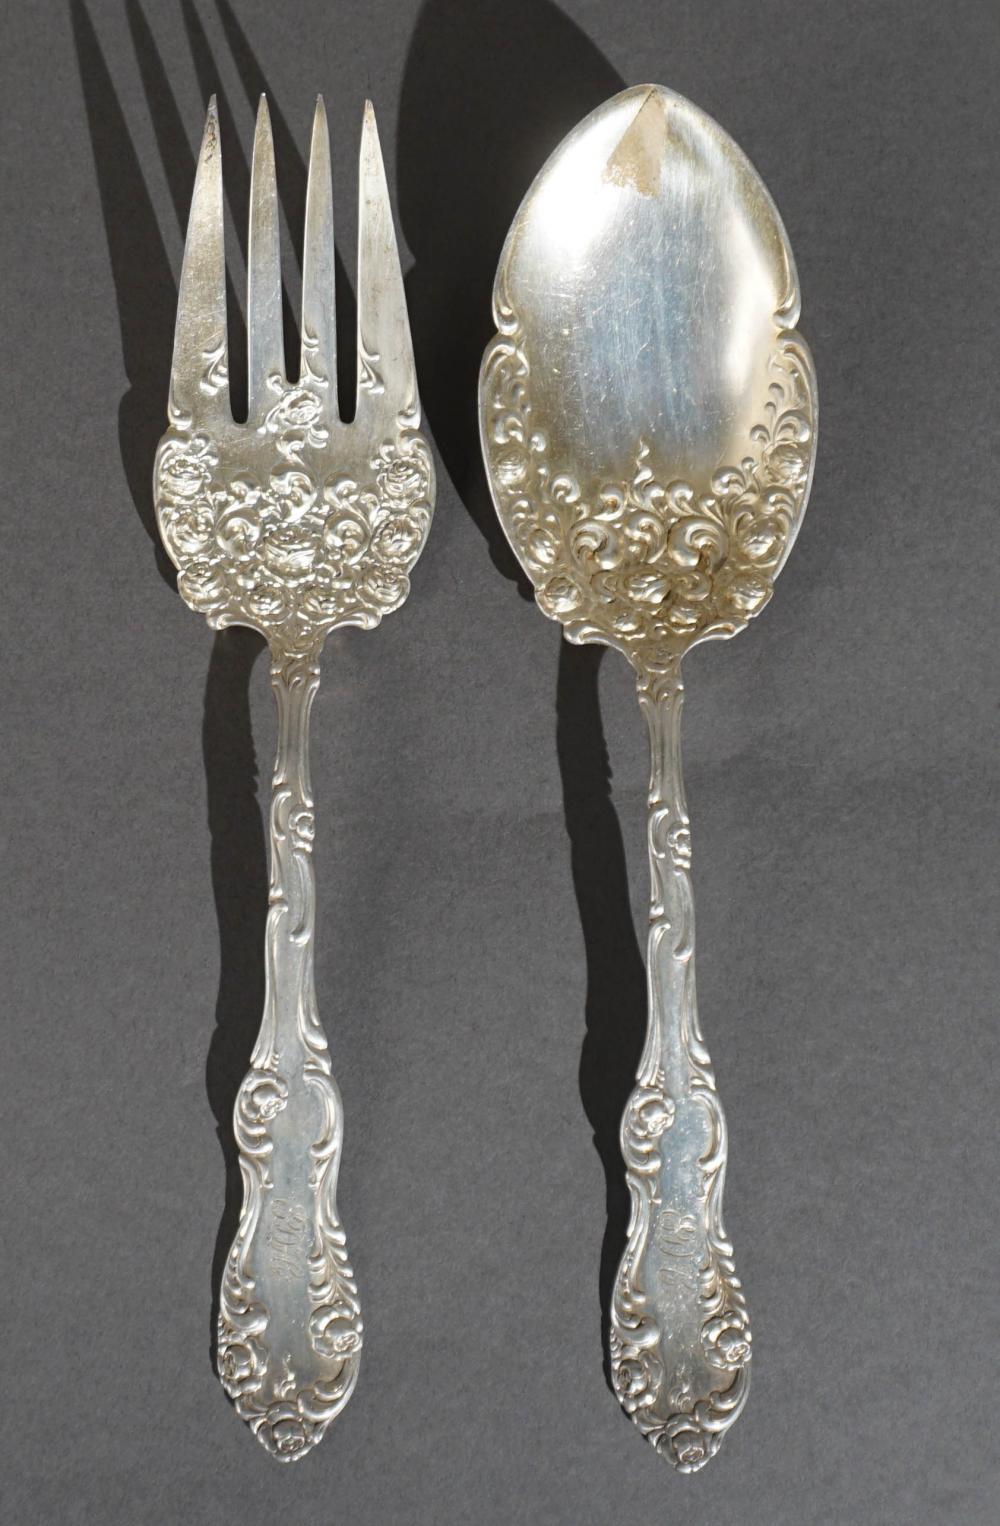 TOWLE SILVER CO. 'OLD ENGLISH'